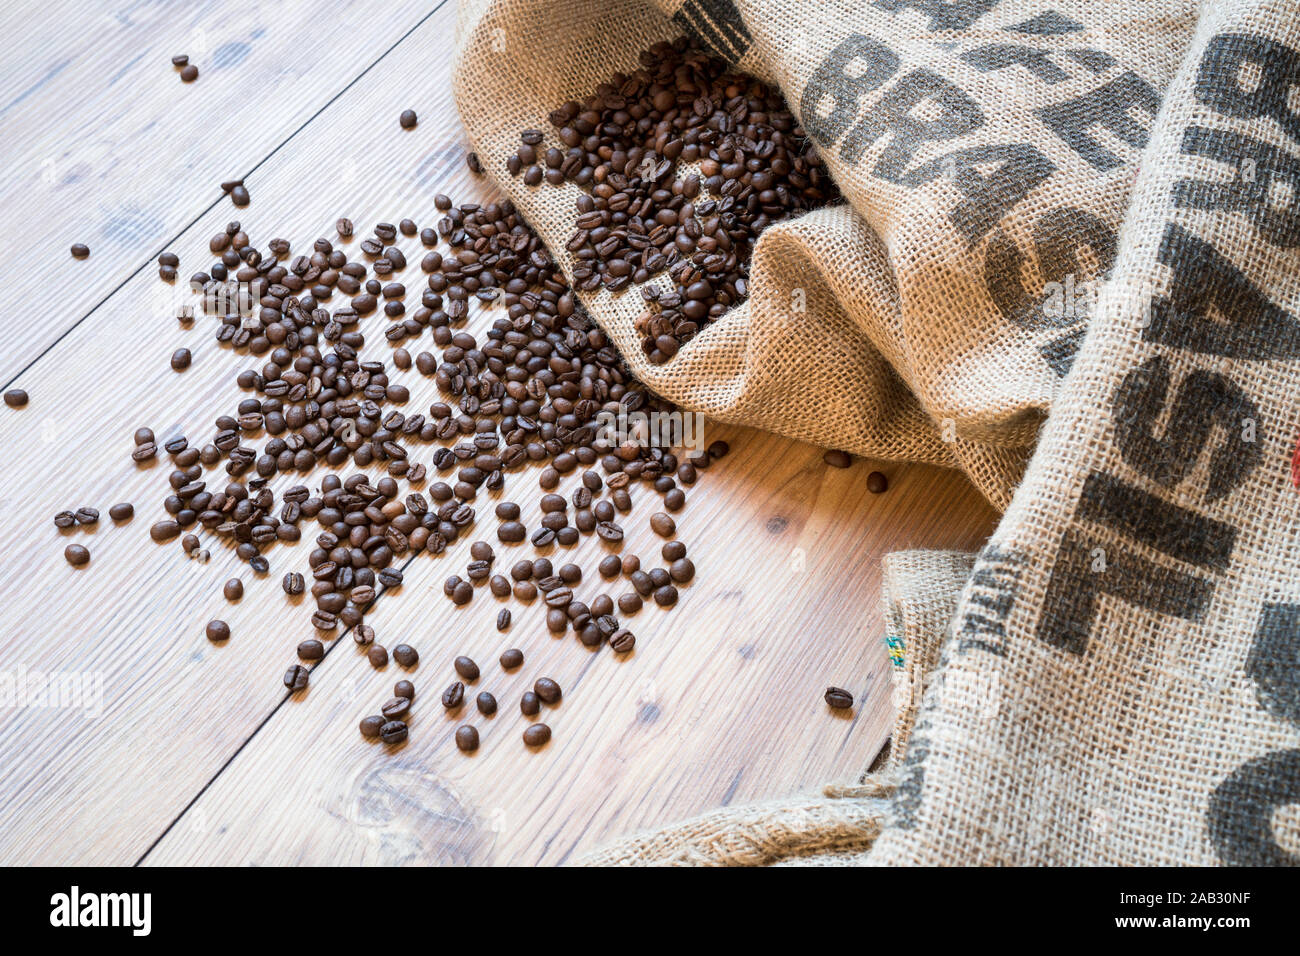 Coffee beans on jute sack and printed Brasil on wooden floor background. Bag of coffee Stock Photo